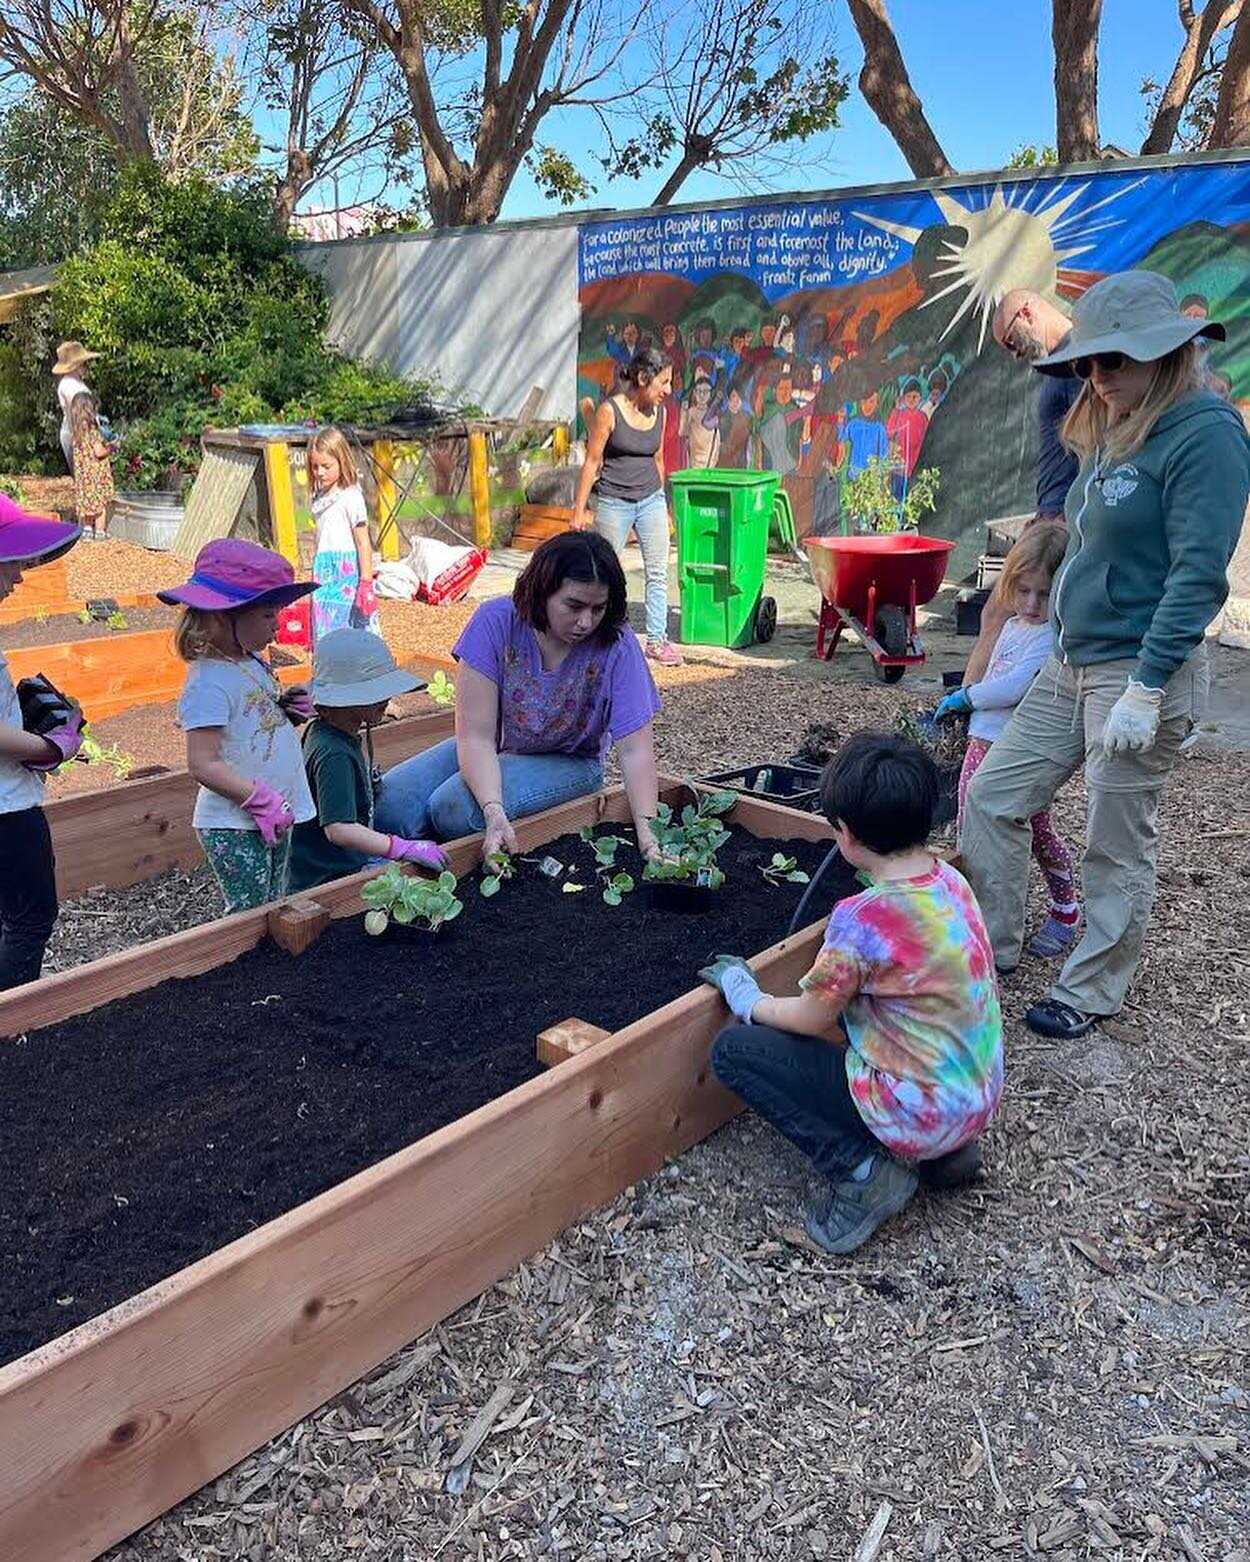 The students and faculty at Leonard R. Flynn Elementary School are enjoying their new garden, which was renovated this summer by parents and volunteers. It now features an outdoor classroom, edible garden, dig zone, and space for healing and emotiona